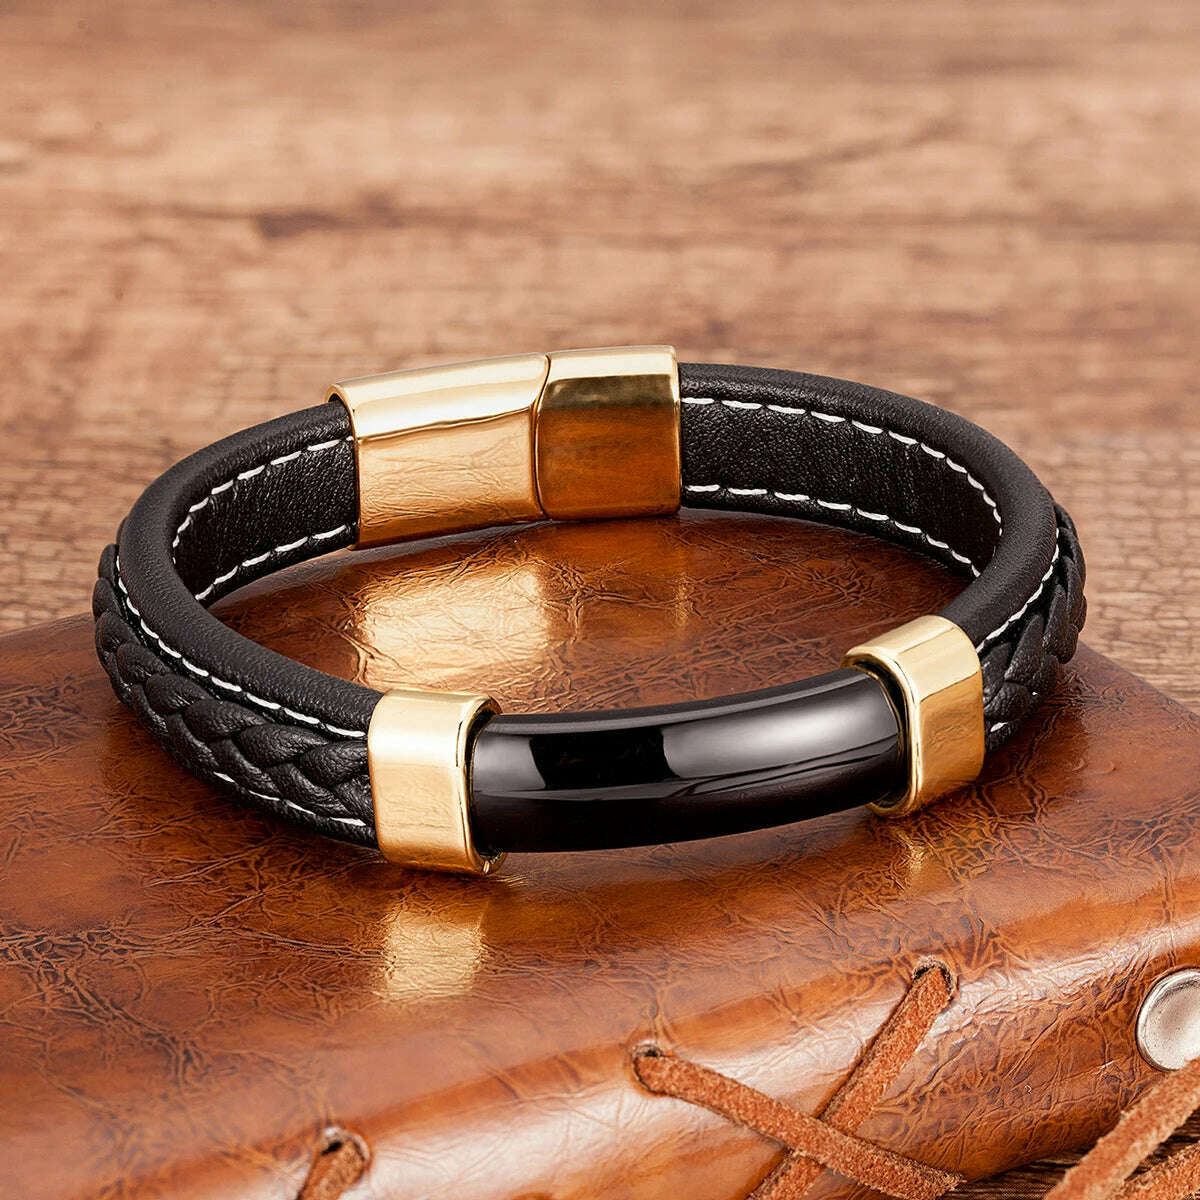 KIMLUD, 100% Natural Stone Mens Bracelet 2021 Luxury Black Genuine Leather Rope Chain Stainless Steel Magnet Clasp Male Jewelry, Black-Agate-Gold / 19cm, KIMLUD Women's Clothes